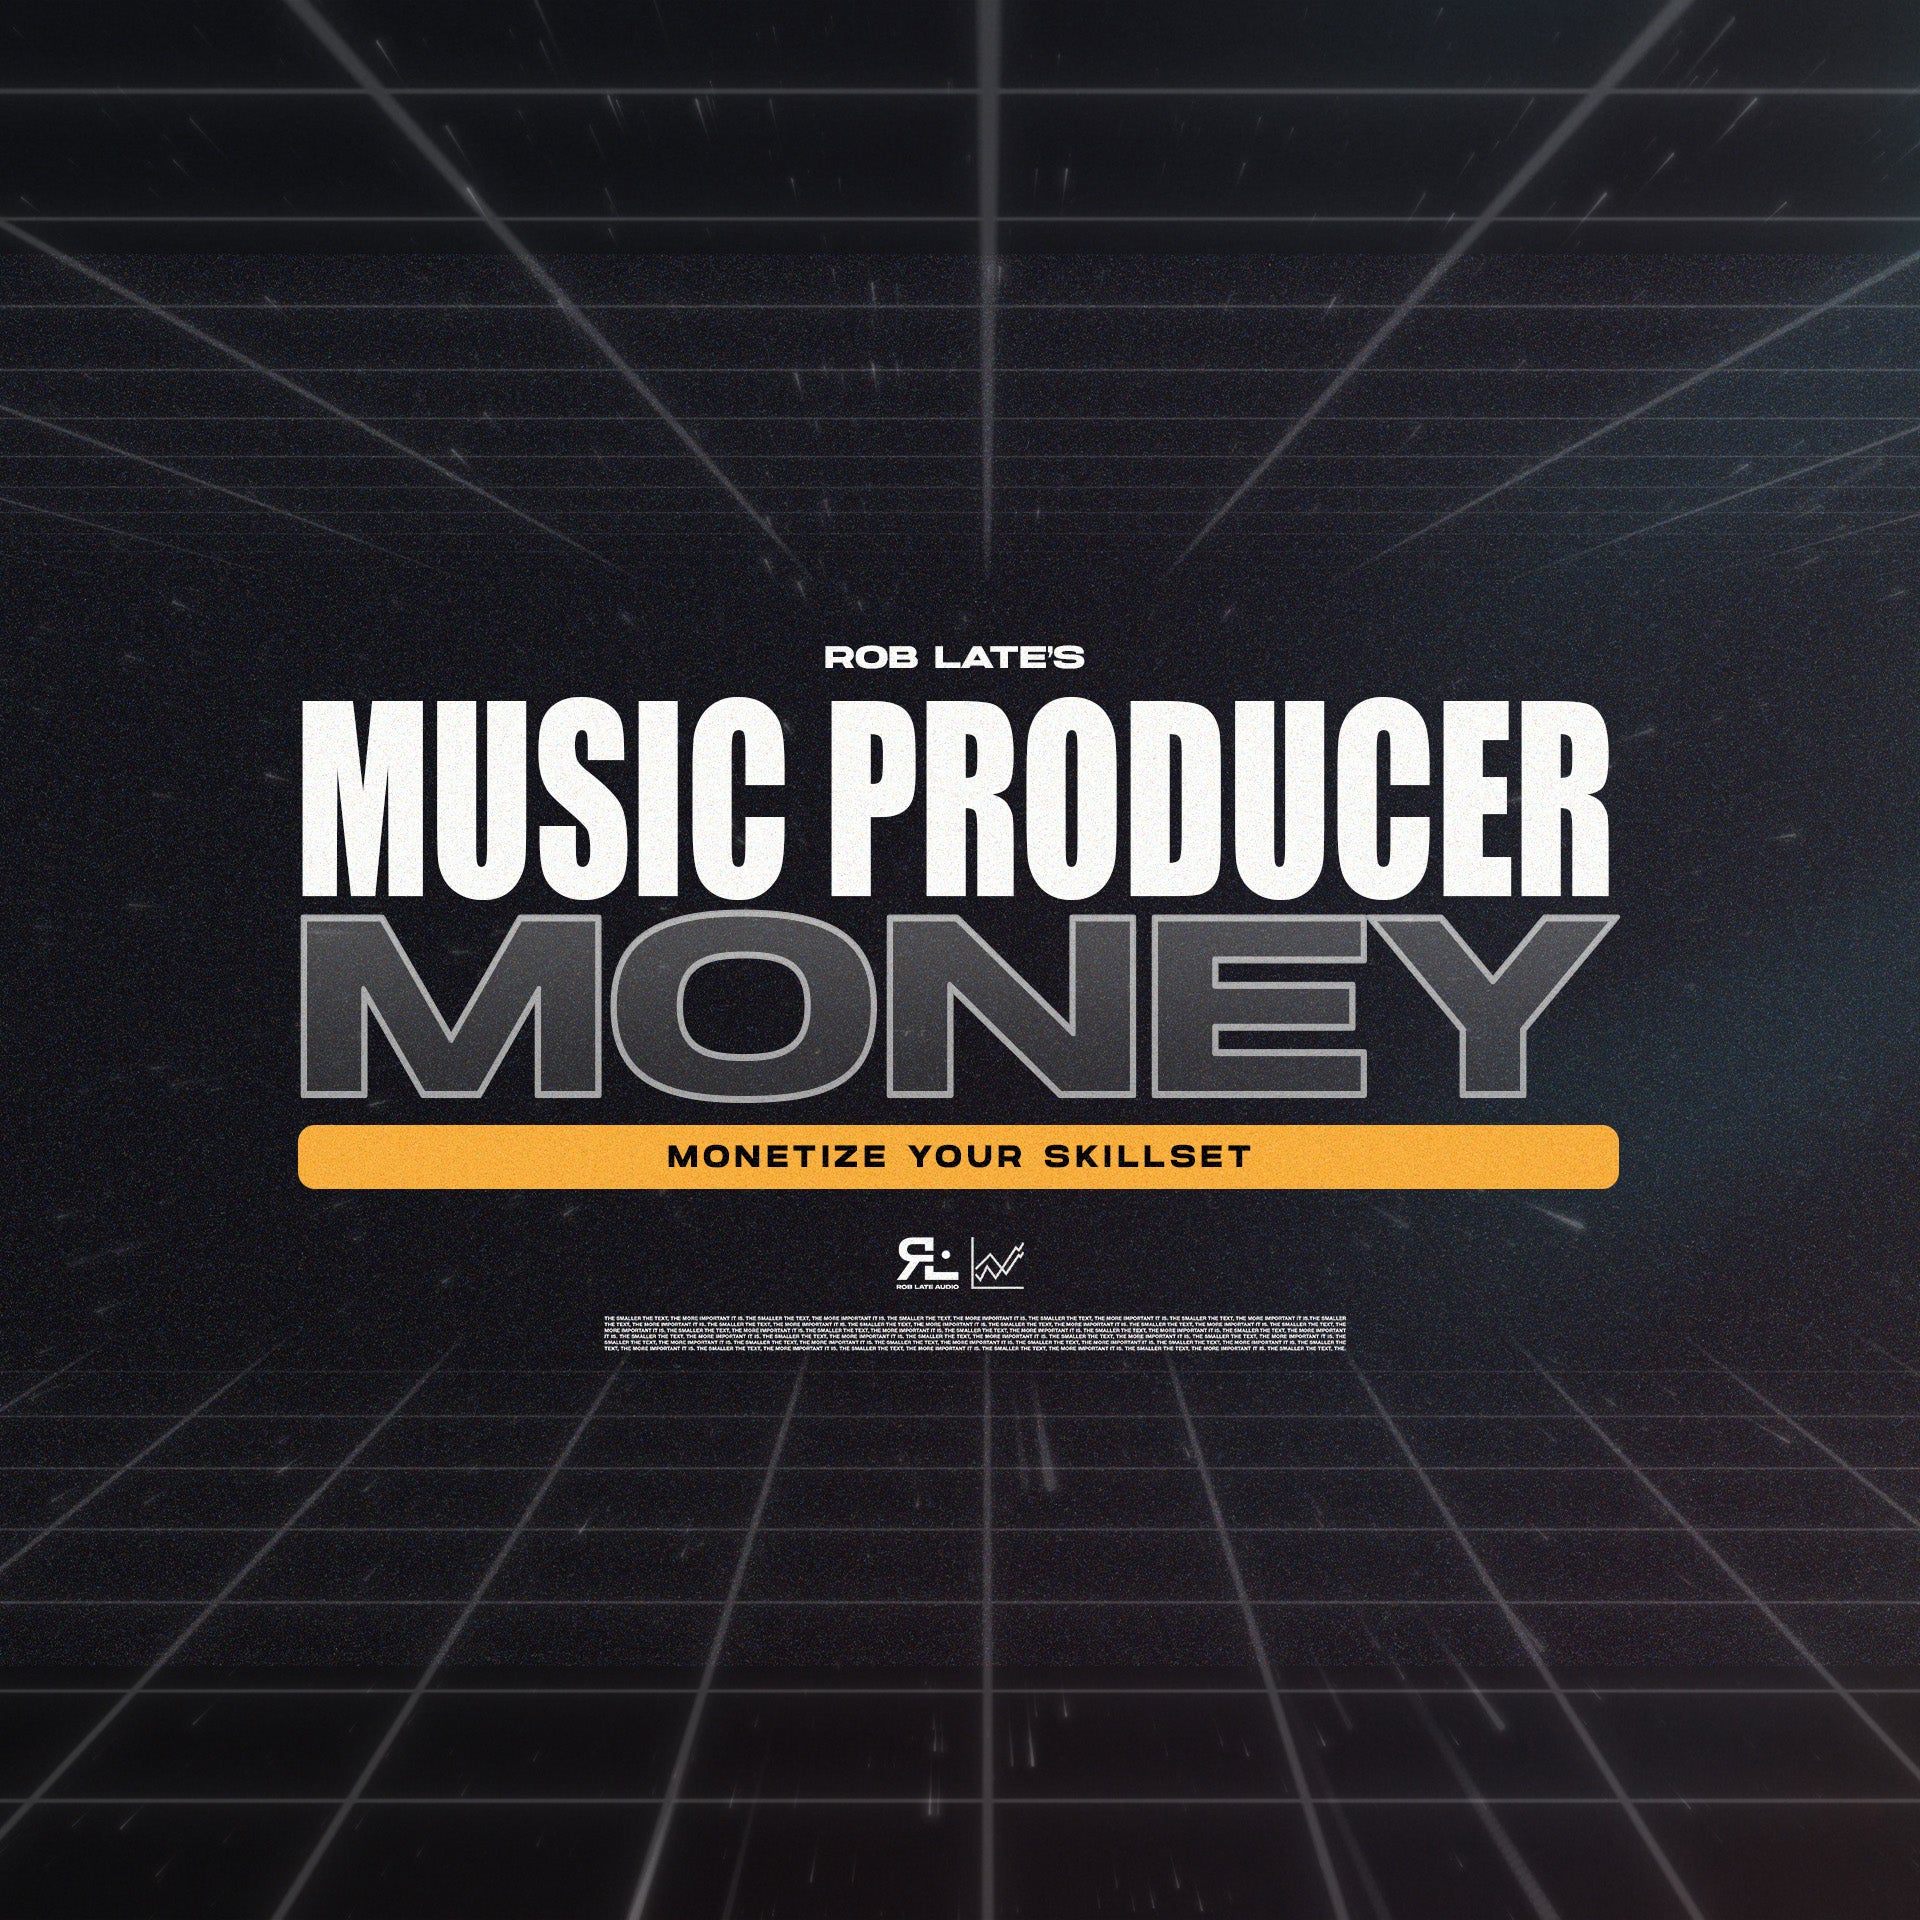 Music Producer Money Course